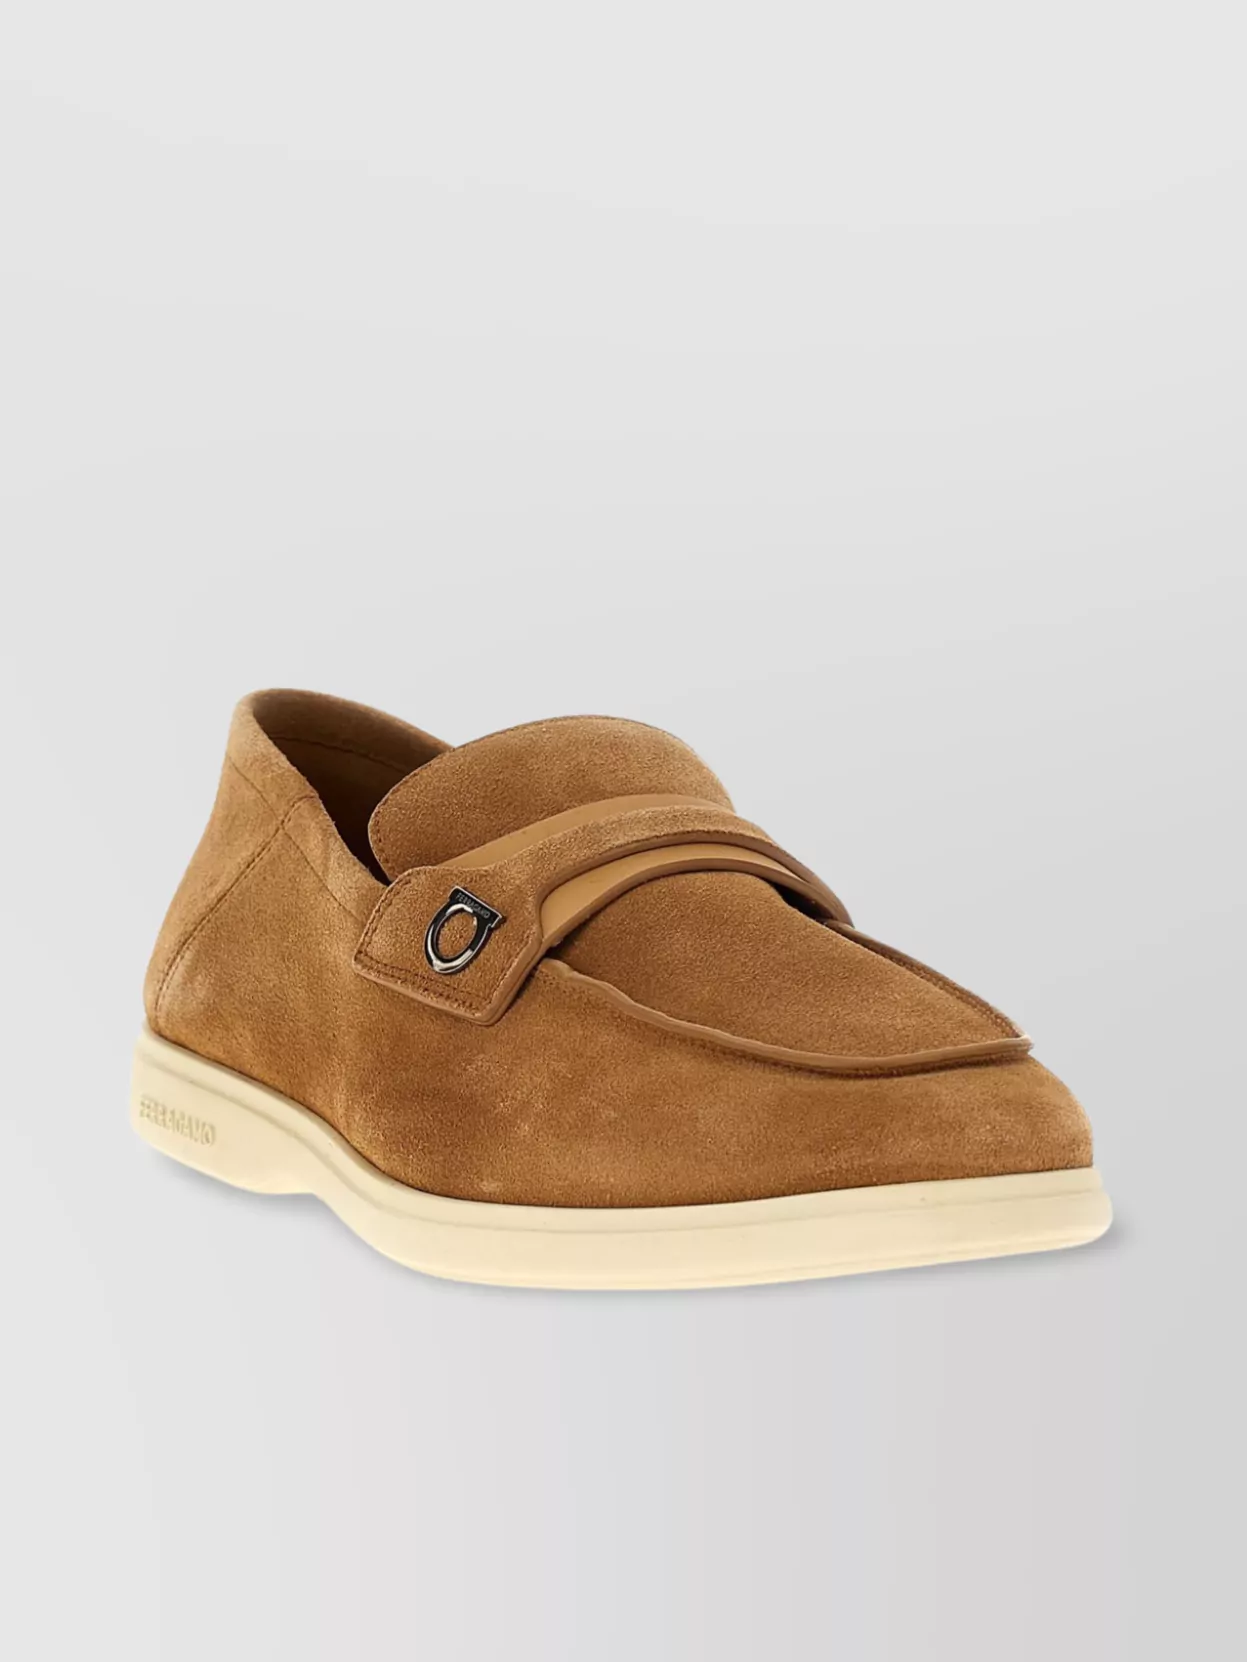 Ferragamo Round Toe Suede Loafers With Metal Hardware In Brown